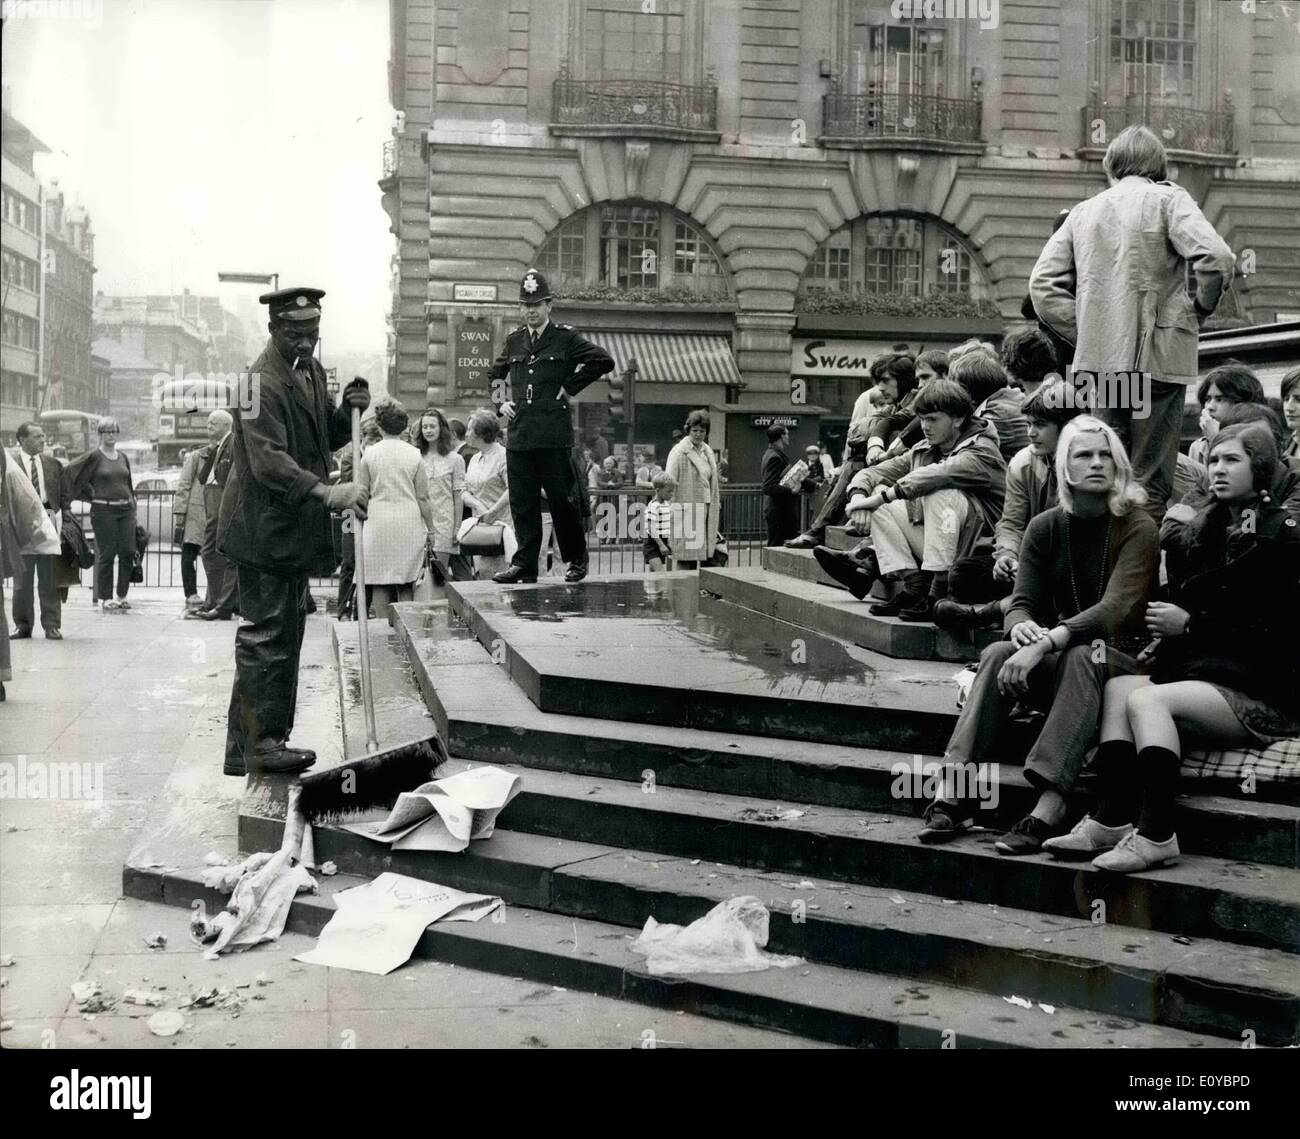 Aug. 08, 1969 - IS LONDON BECOMING SHAMEFUL? Piccadilly, Green Park, Leceister Square - places for London to be proud of, For those are the places that have been virtually taken over by crowds of hippies, beatniks and dropouts. Day and night they are to be found littering ''Eros Island'' - the area surrounding the Eros Statue, London's most famous landmark, at Piccadilly Circus Stock Photo